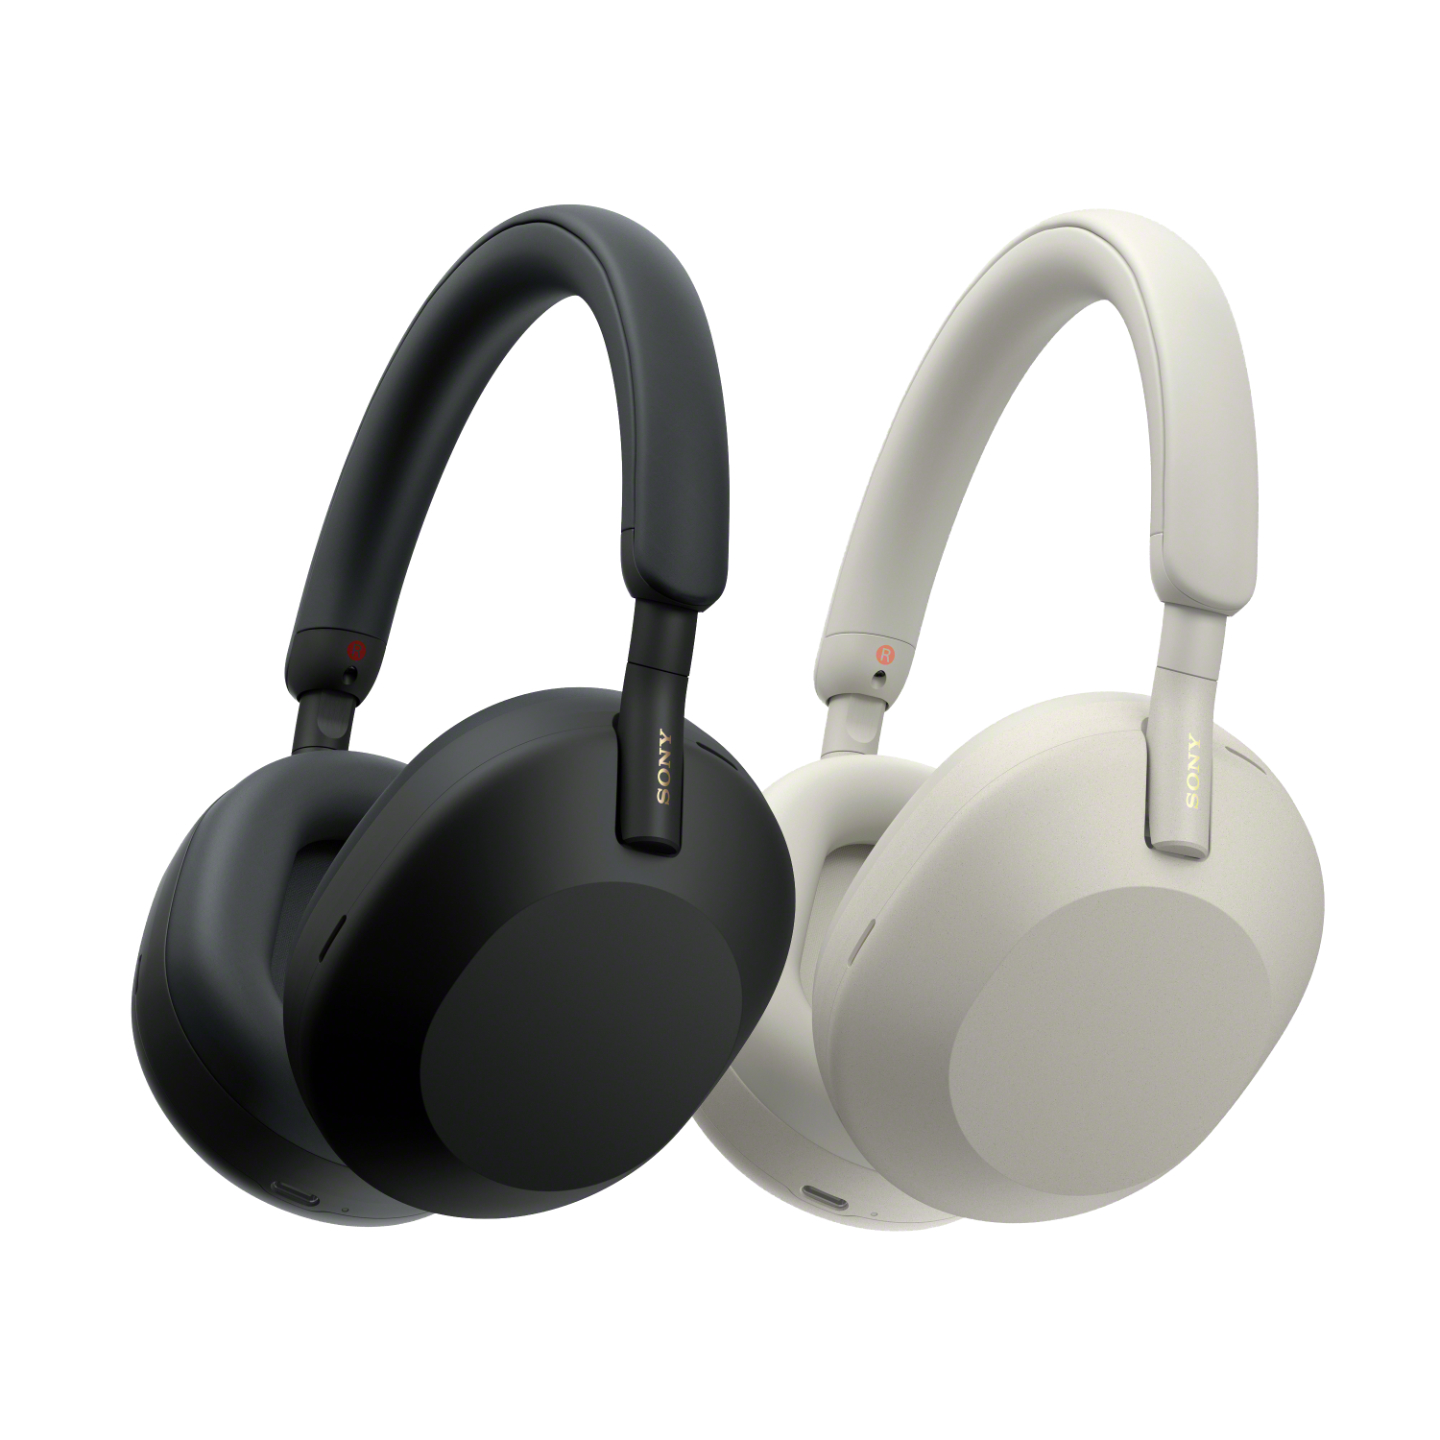 Stellar Sony WH-1000XM5 noise canceling headphones going for 13% less than MSRP on Amazon - NotebookCheck.net News